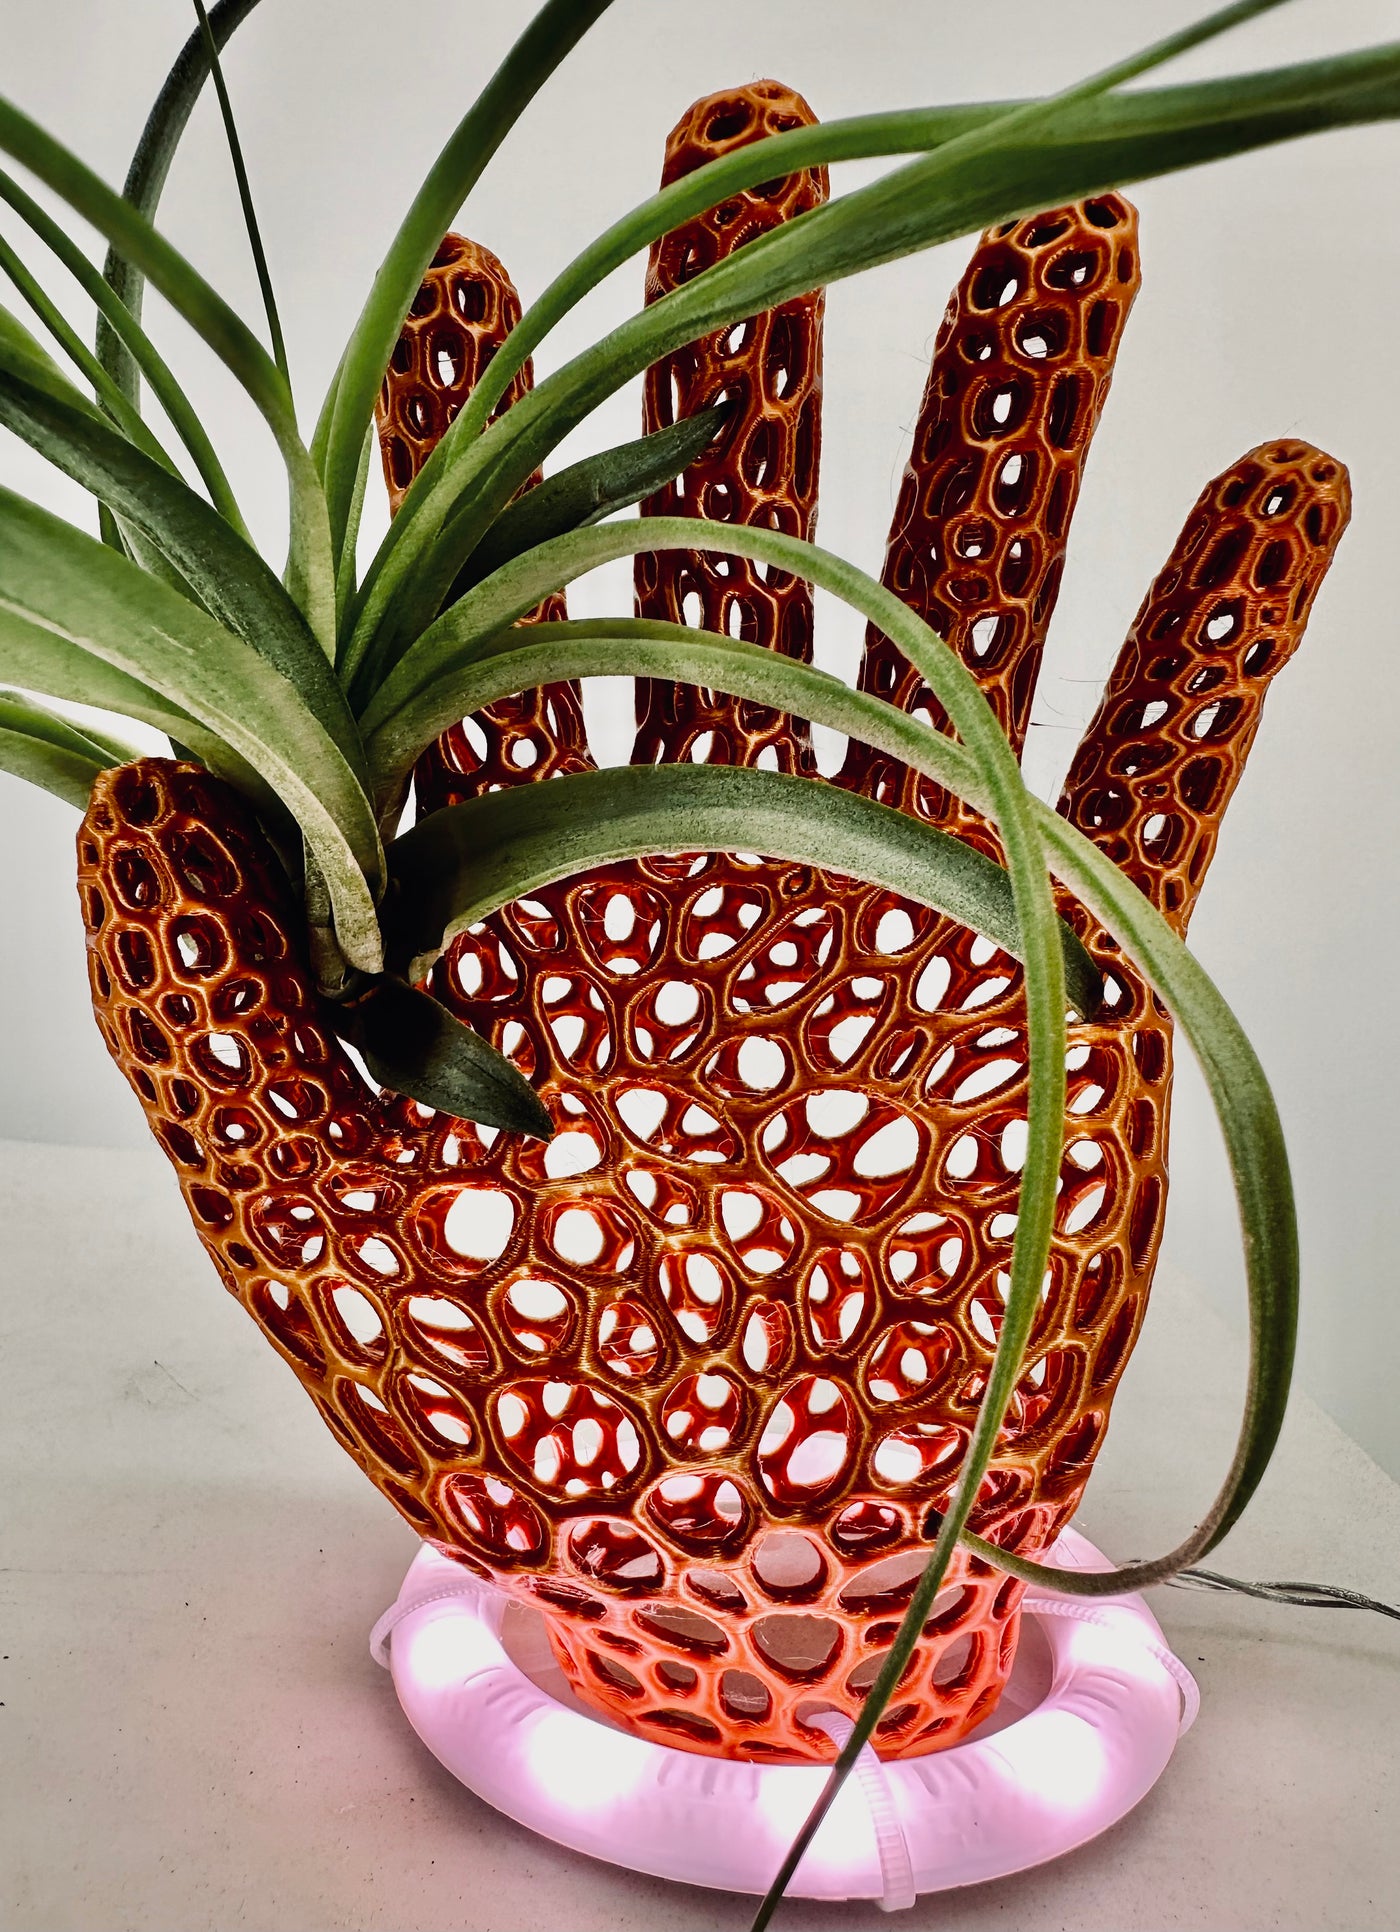 Give 'Em A Hand -  This 3d printed hand is available in gold or silver and comes with an easy-to care-for air plant, along with a grow light base ring  - $24.95 - ($5.00 OFF regular price of $29.95 for a limited time)